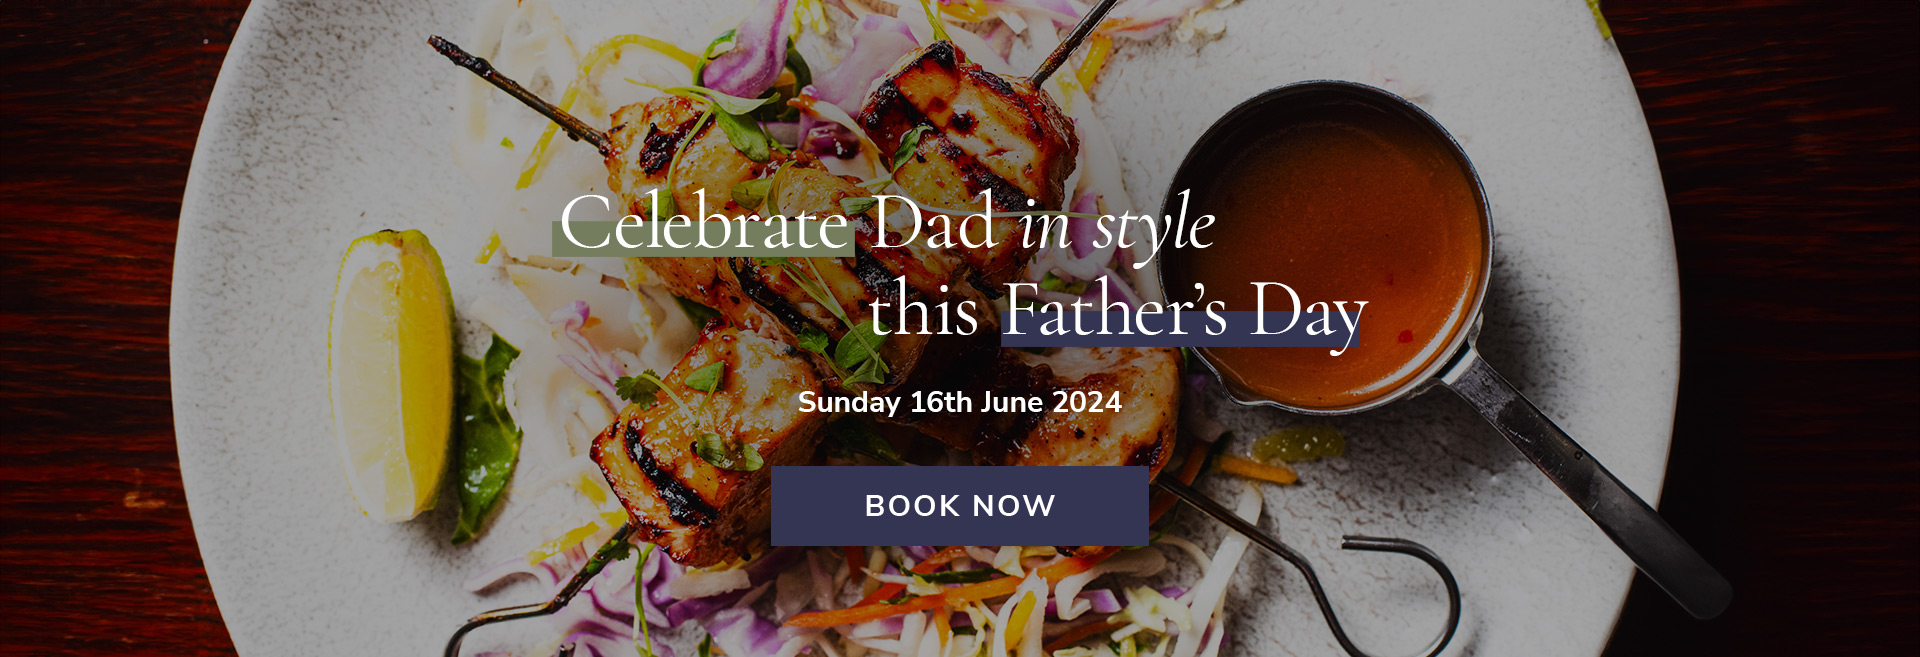 Father's Day at The Prince Regent